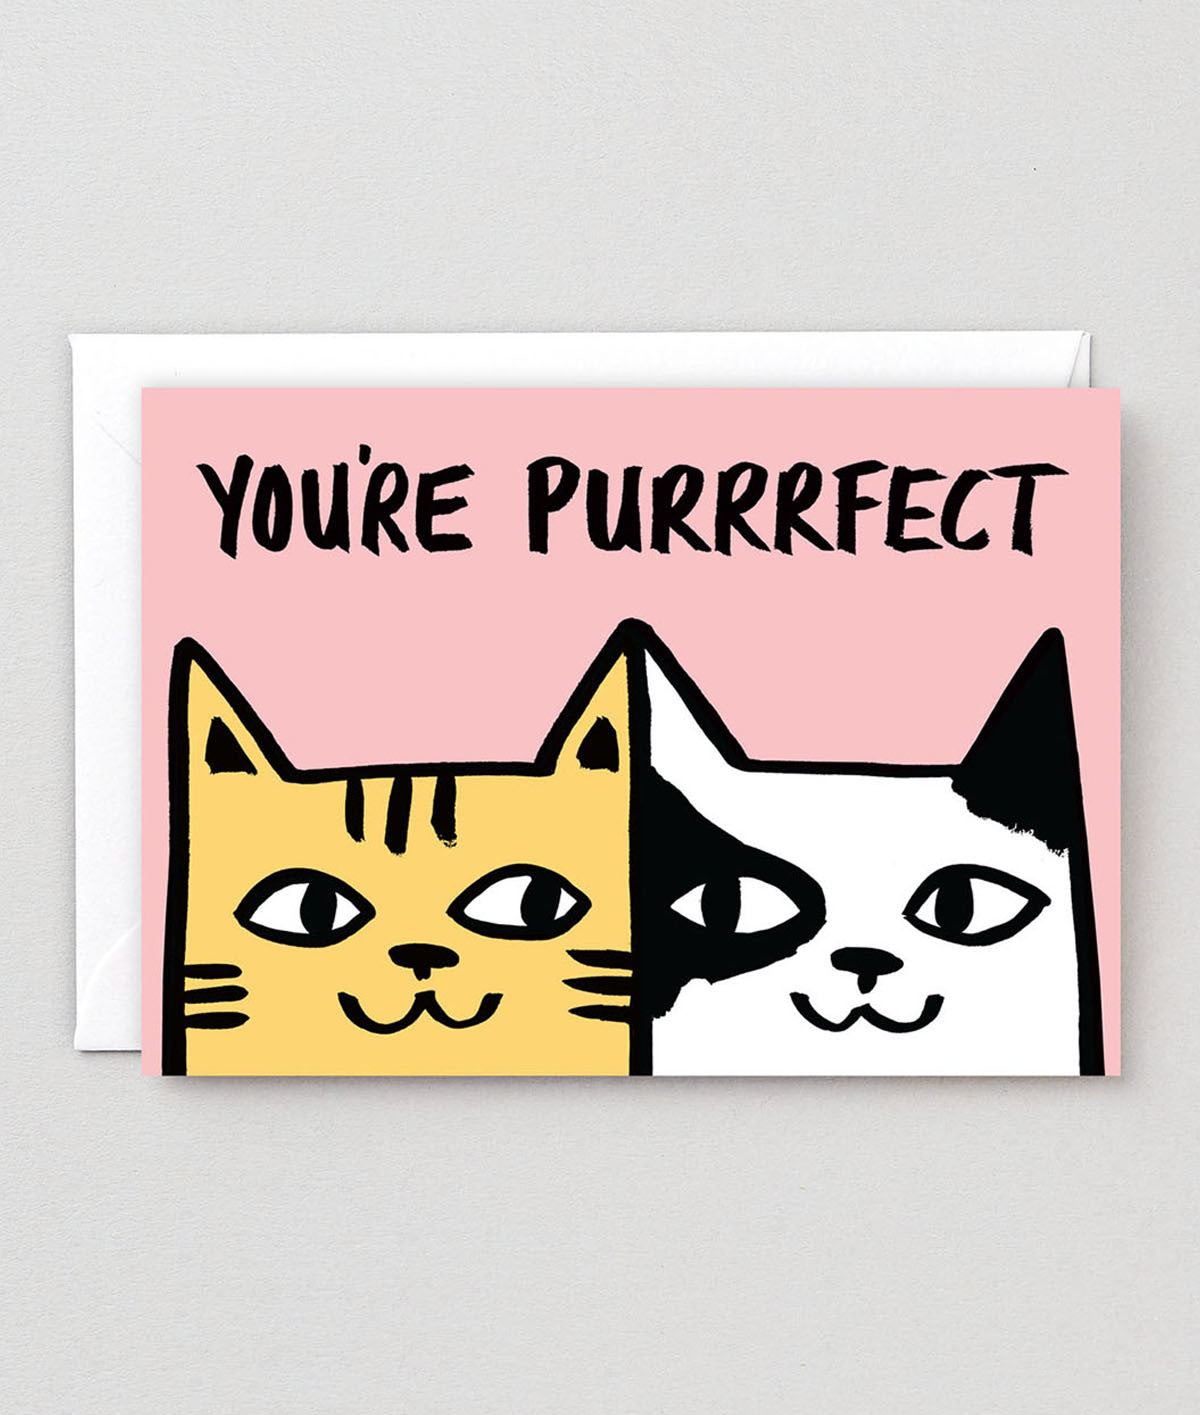 You're Purrrfect Greetings Card